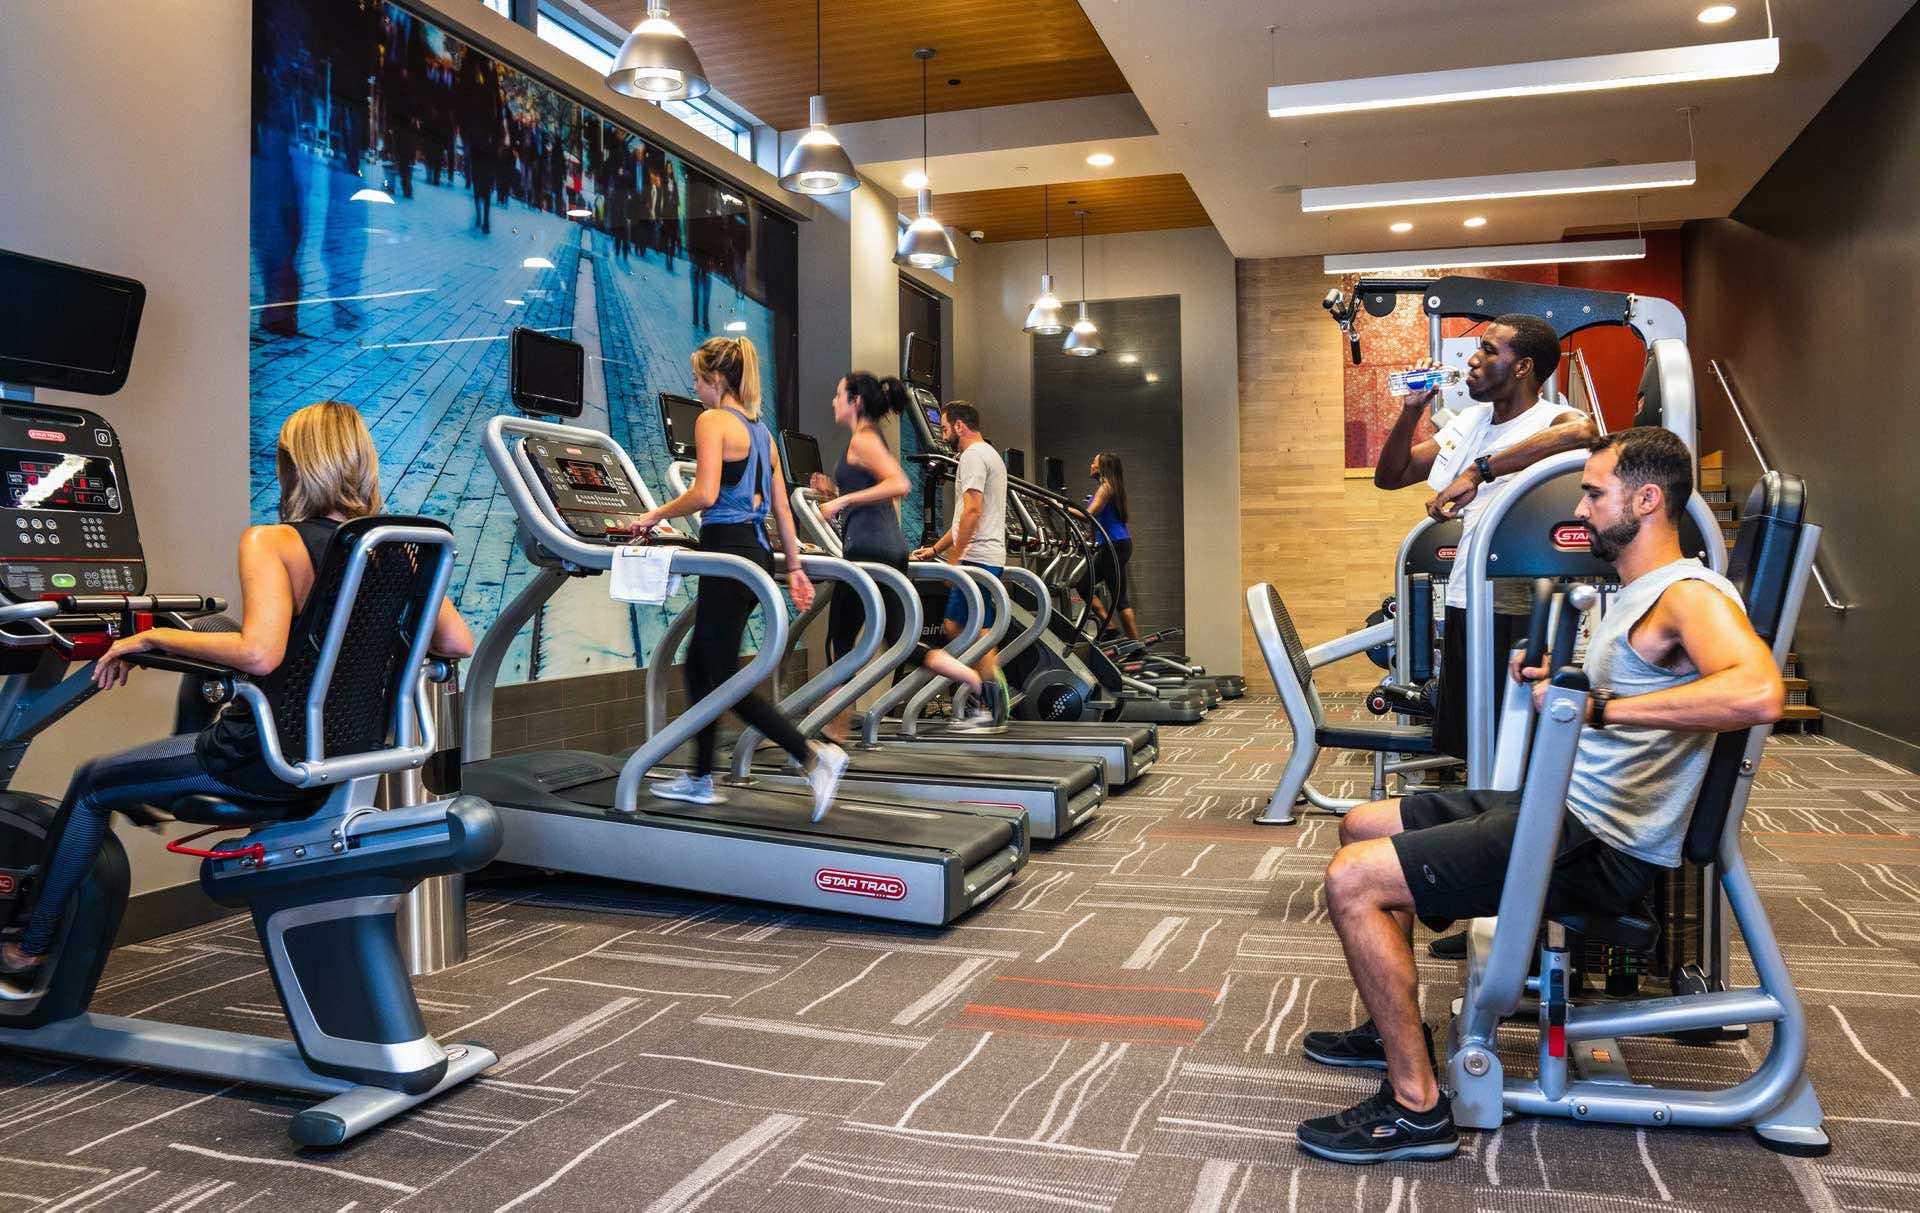 Get a sweat on in our Health club-caliber fitness center equipped with cardio, weight machines and complimentary towel service. 